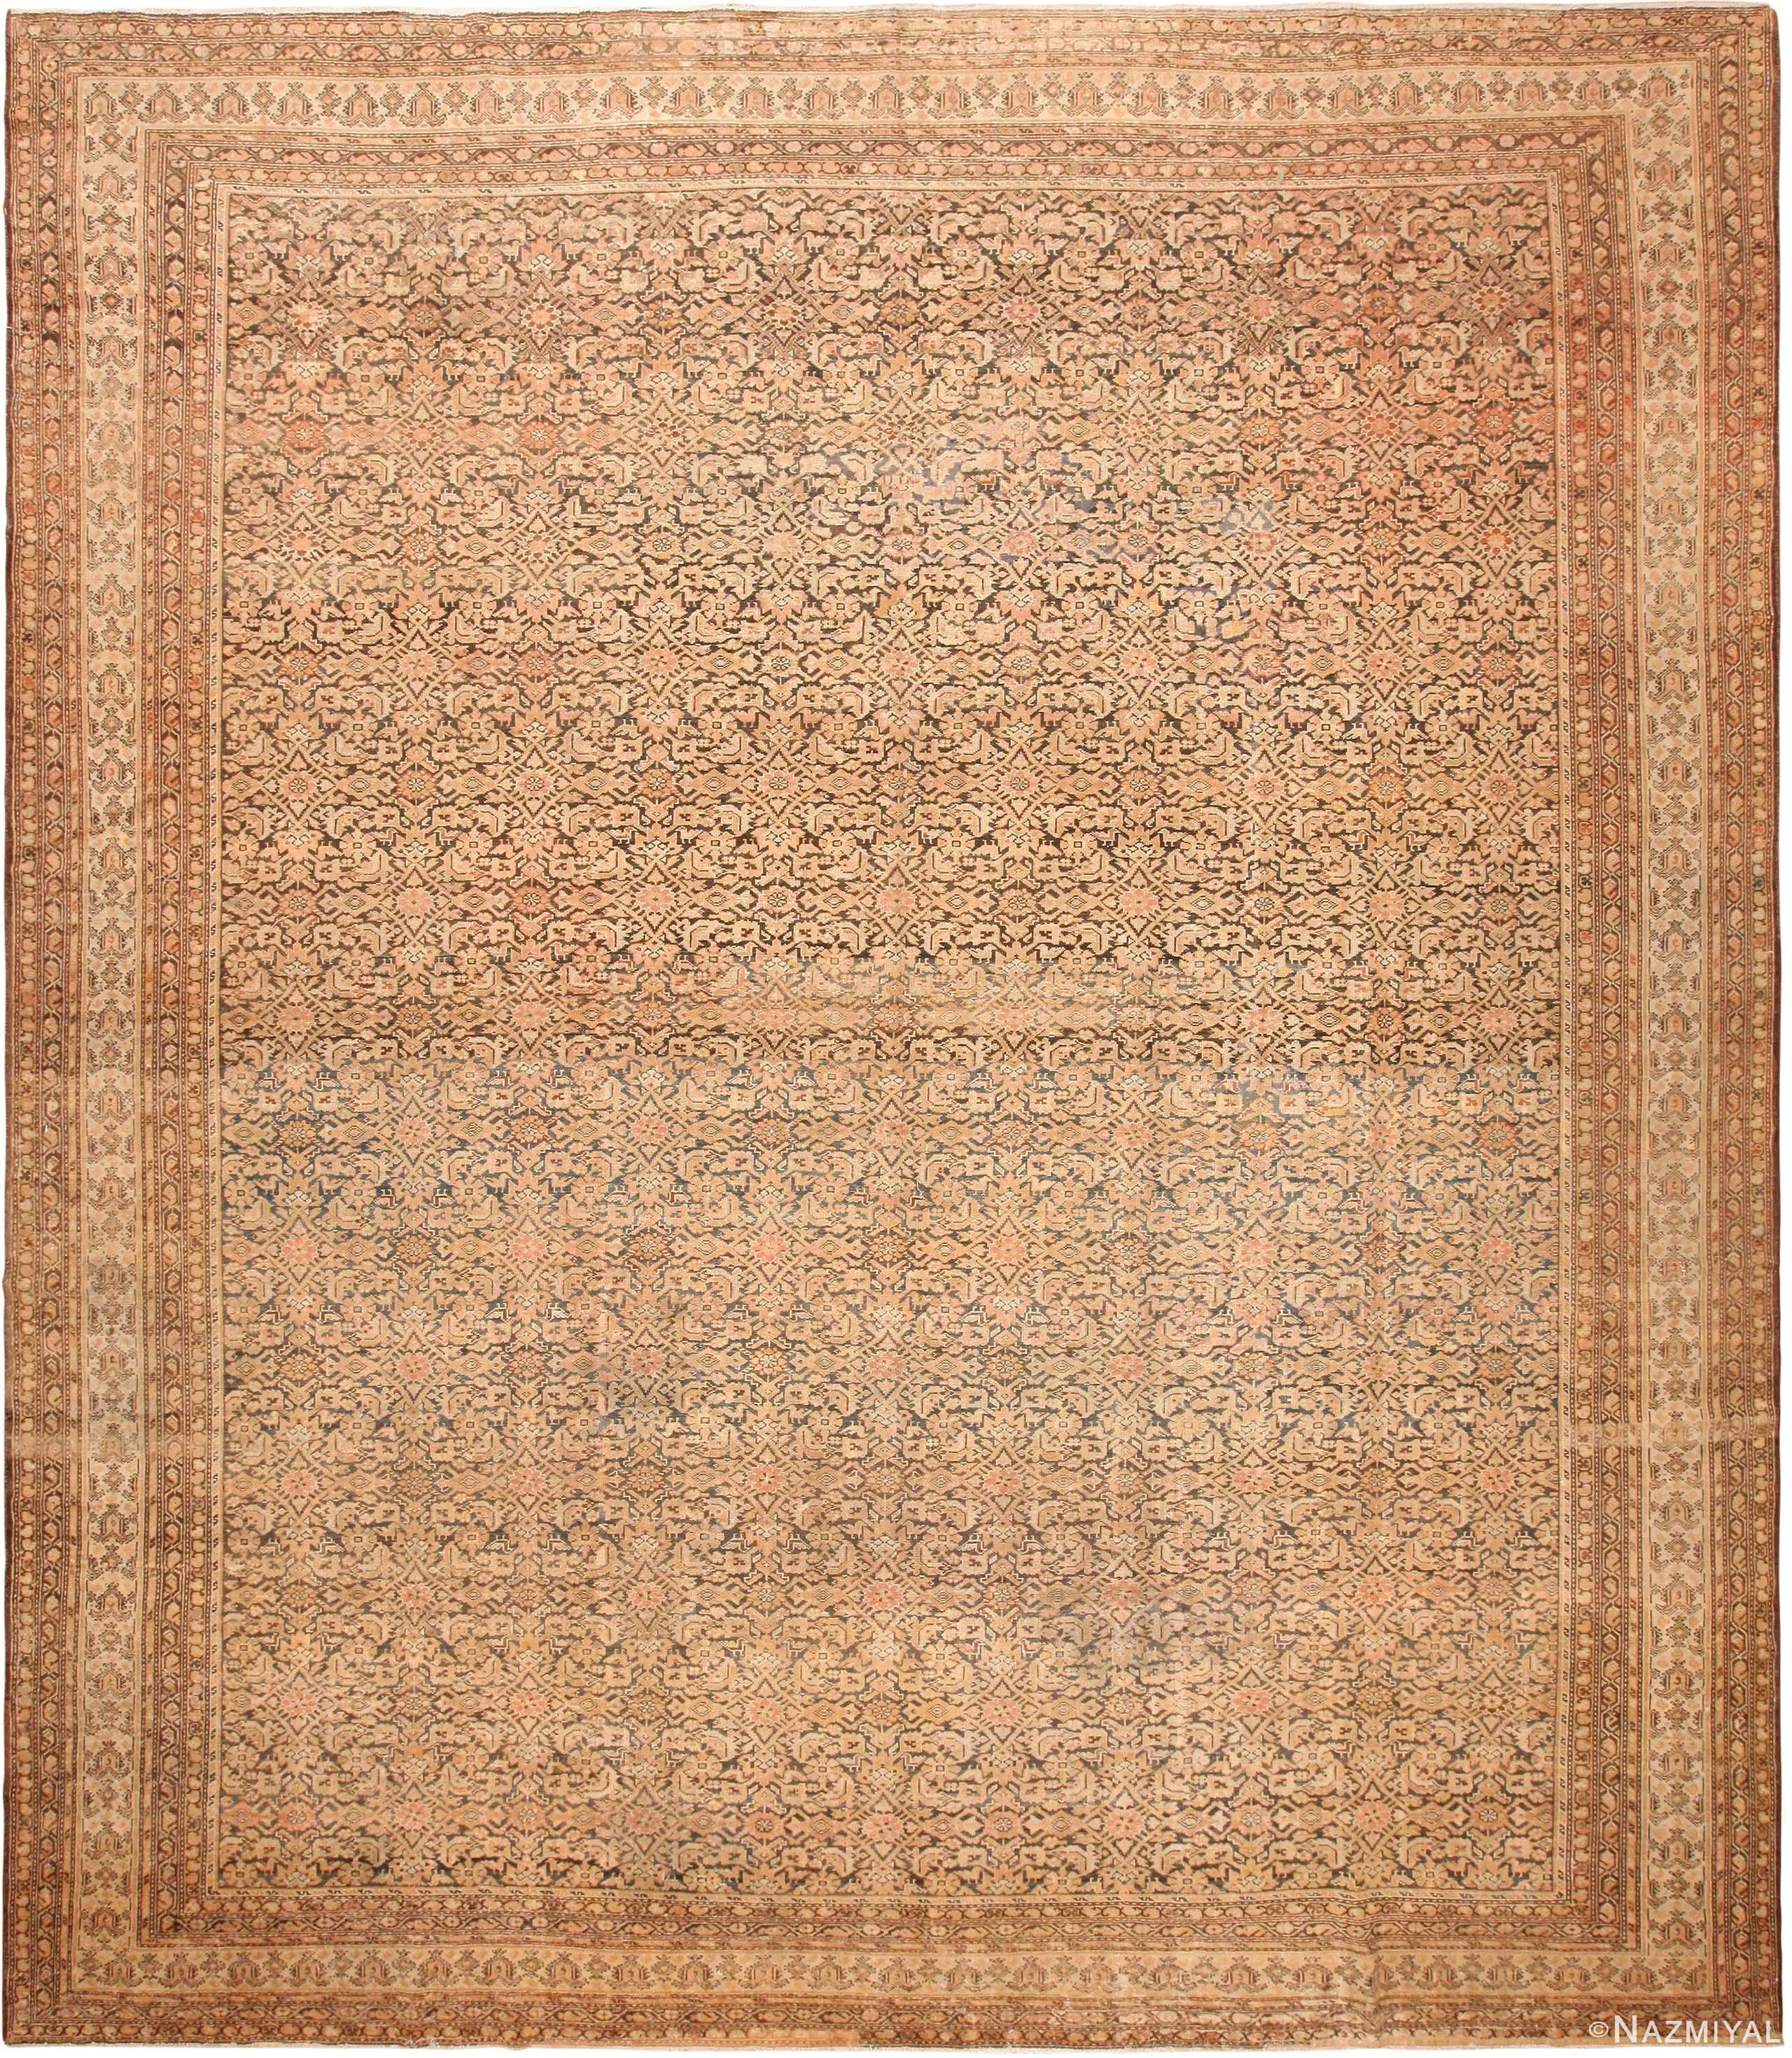 Large Geometric Antique Persian Malayer Rug 71338 by Nazmiyal Antique Rugs